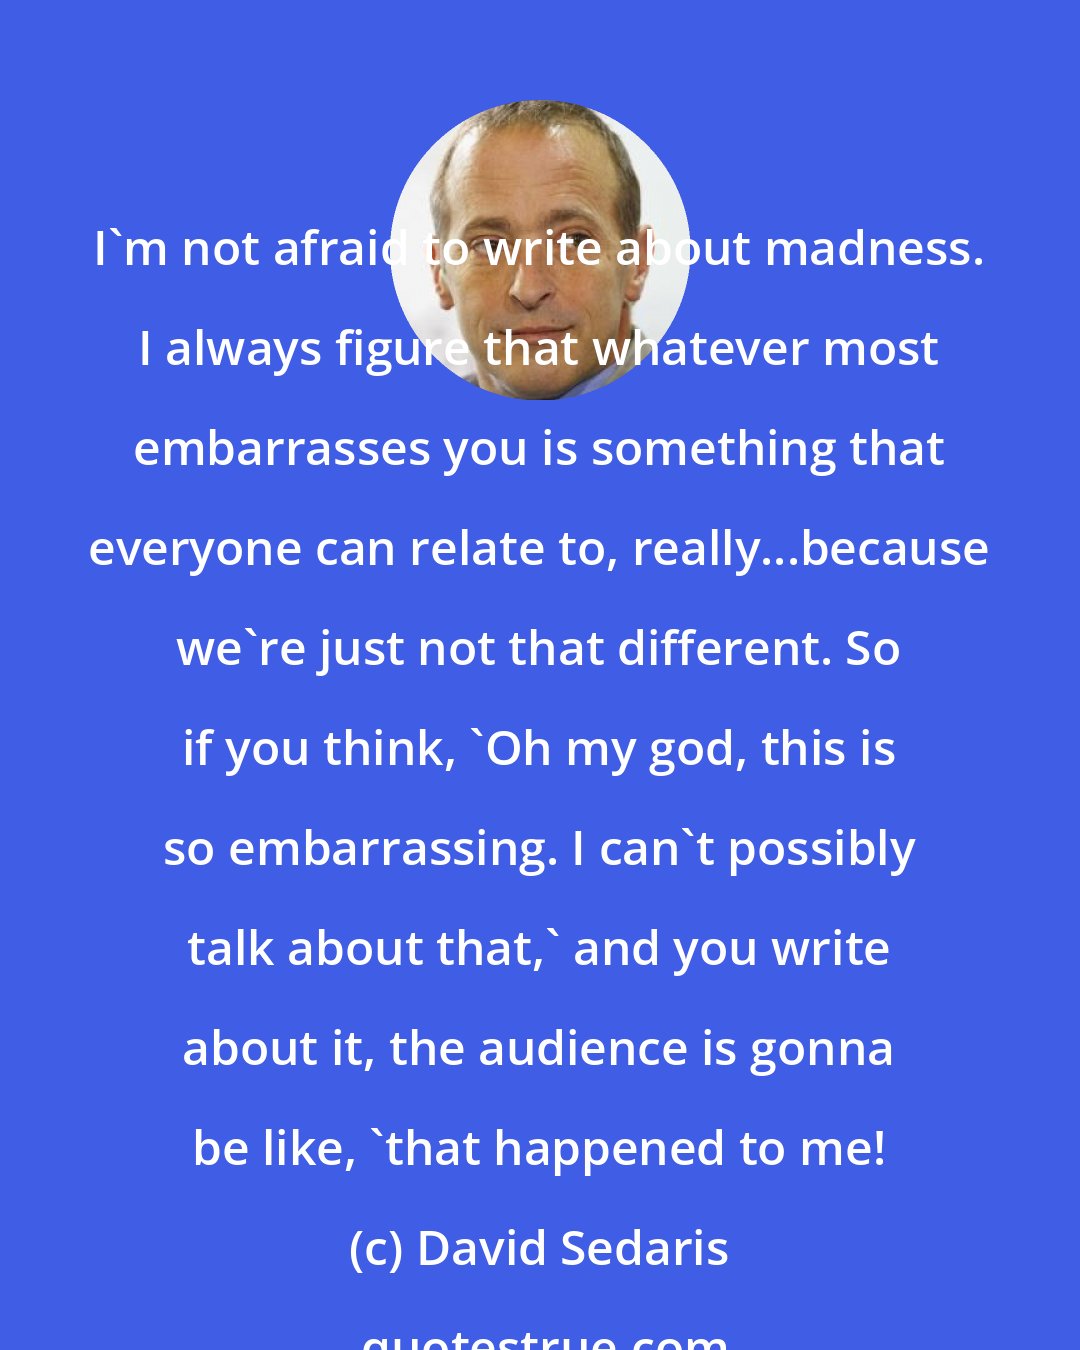 David Sedaris: I'm not afraid to write about madness. I always figure that whatever most embarrasses you is something that everyone can relate to, really...because we're just not that different. So if you think, 'Oh my god, this is so embarrassing. I can't possibly talk about that,' and you write about it, the audience is gonna be like, 'that happened to me!